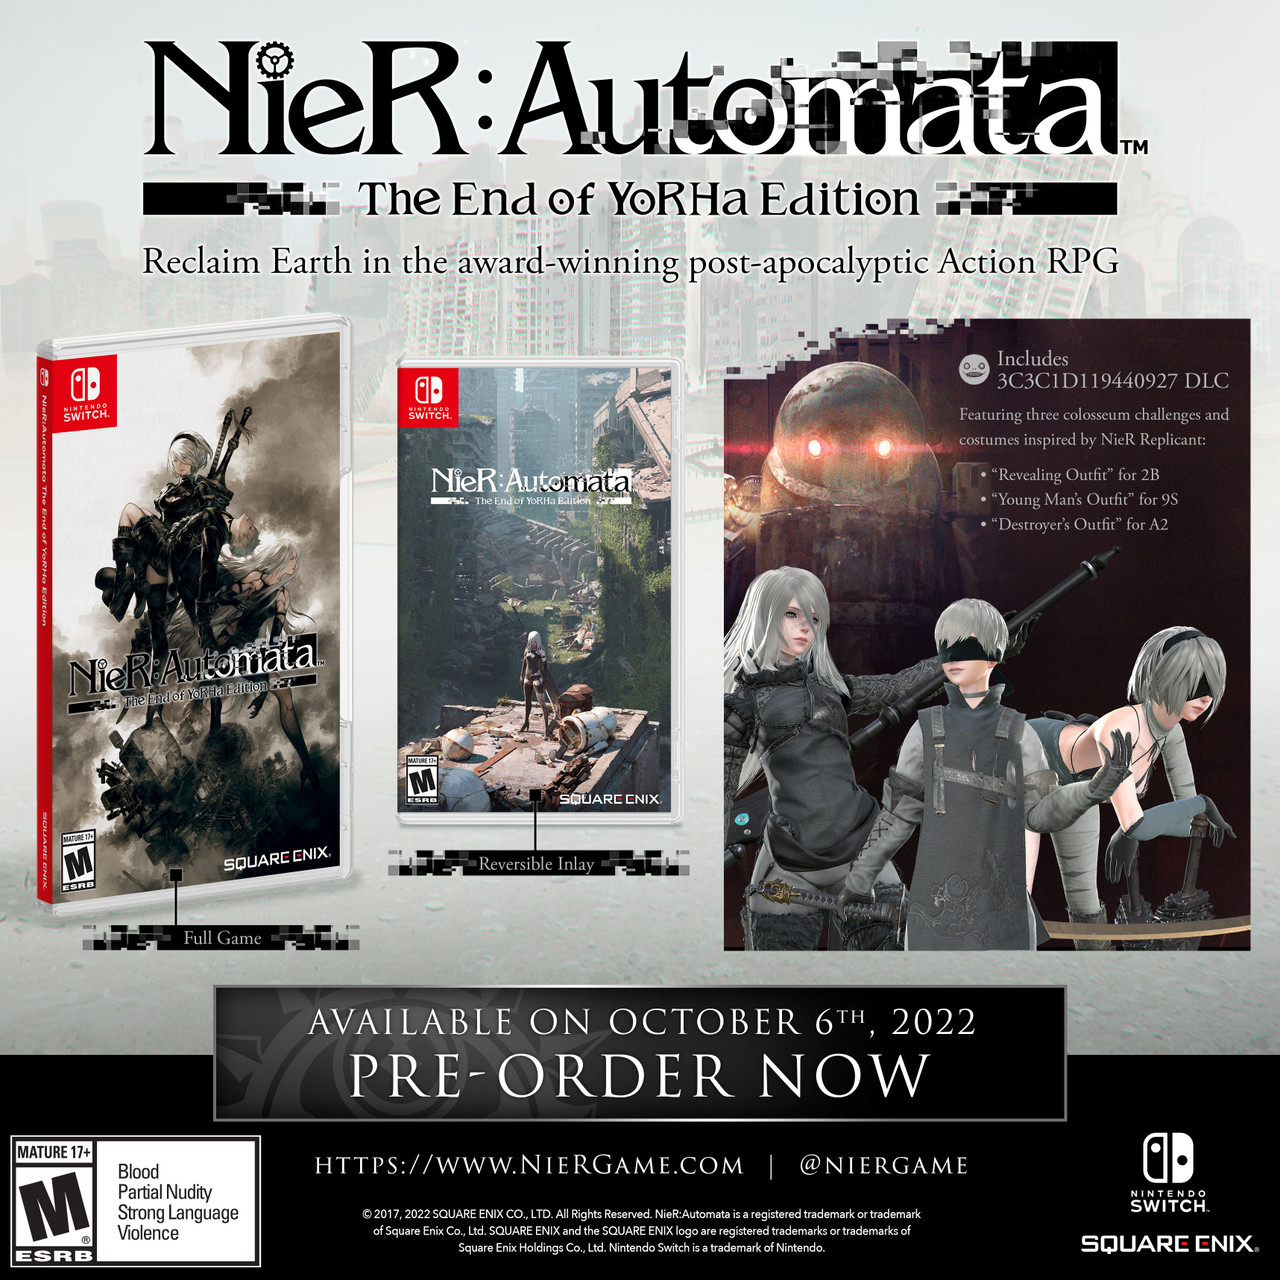 Nier Replicant datamine 'uncovers Nintendo Switch references